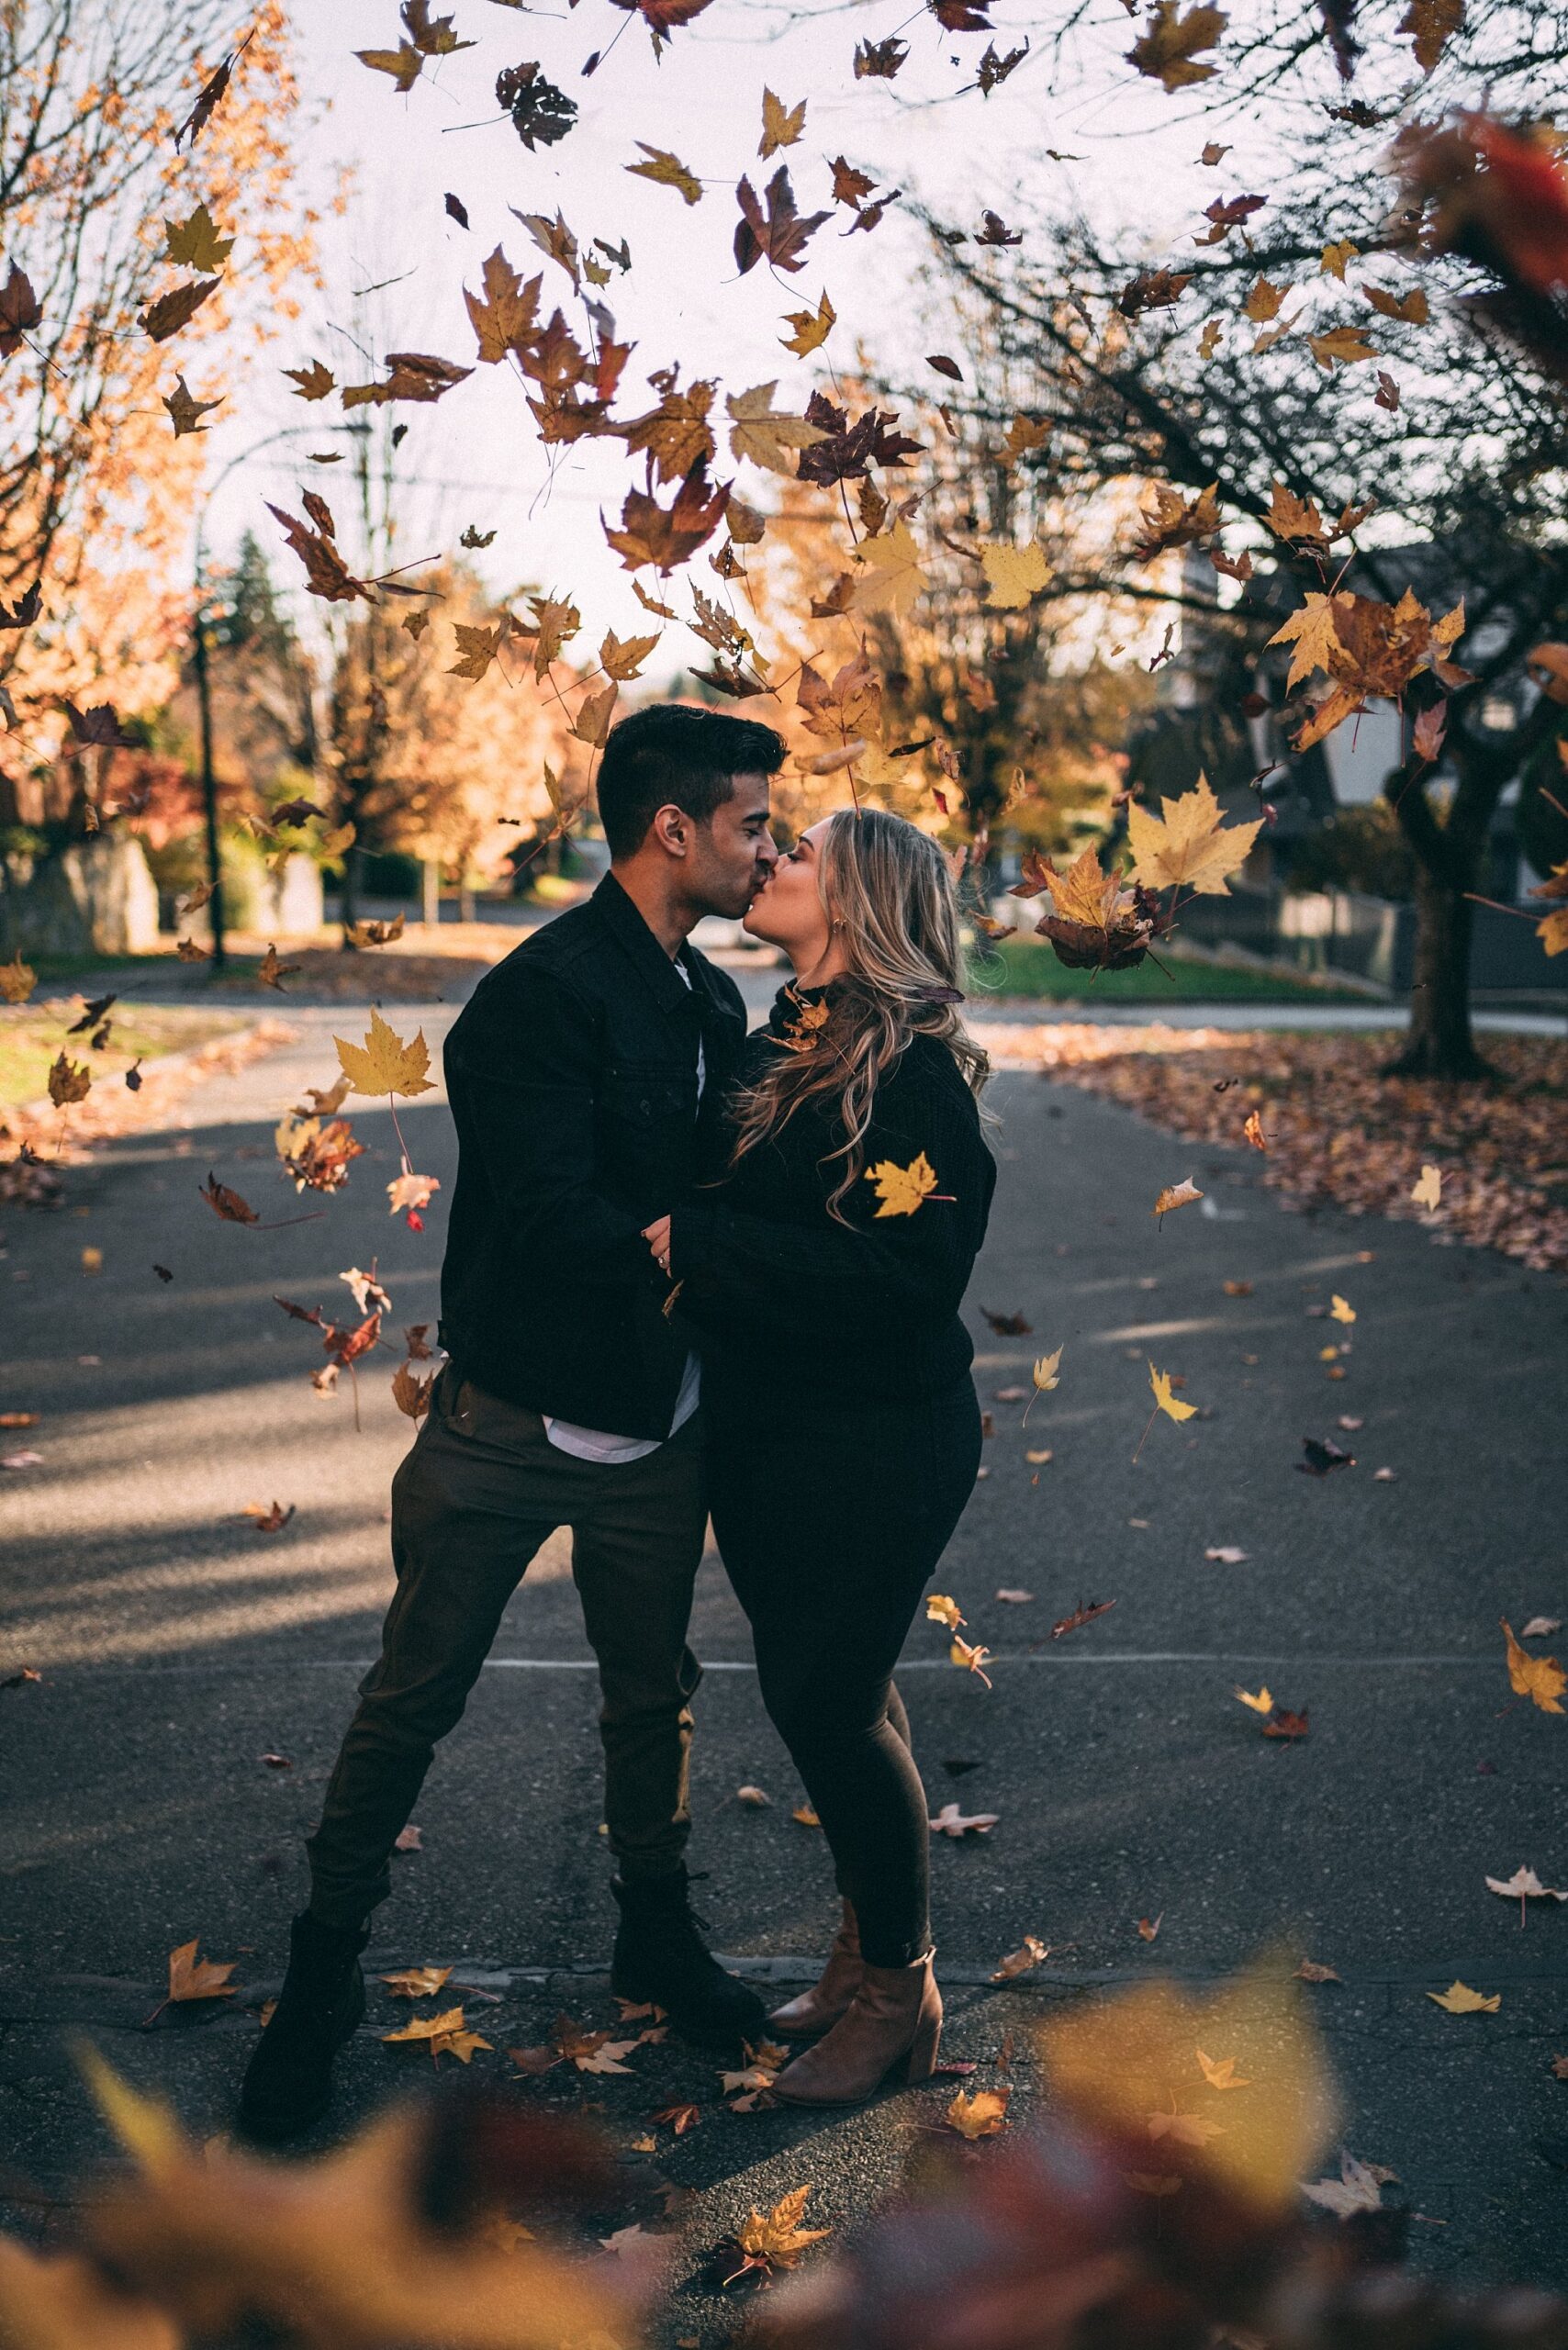 autumn leaves falling while couple kisses in middle of street